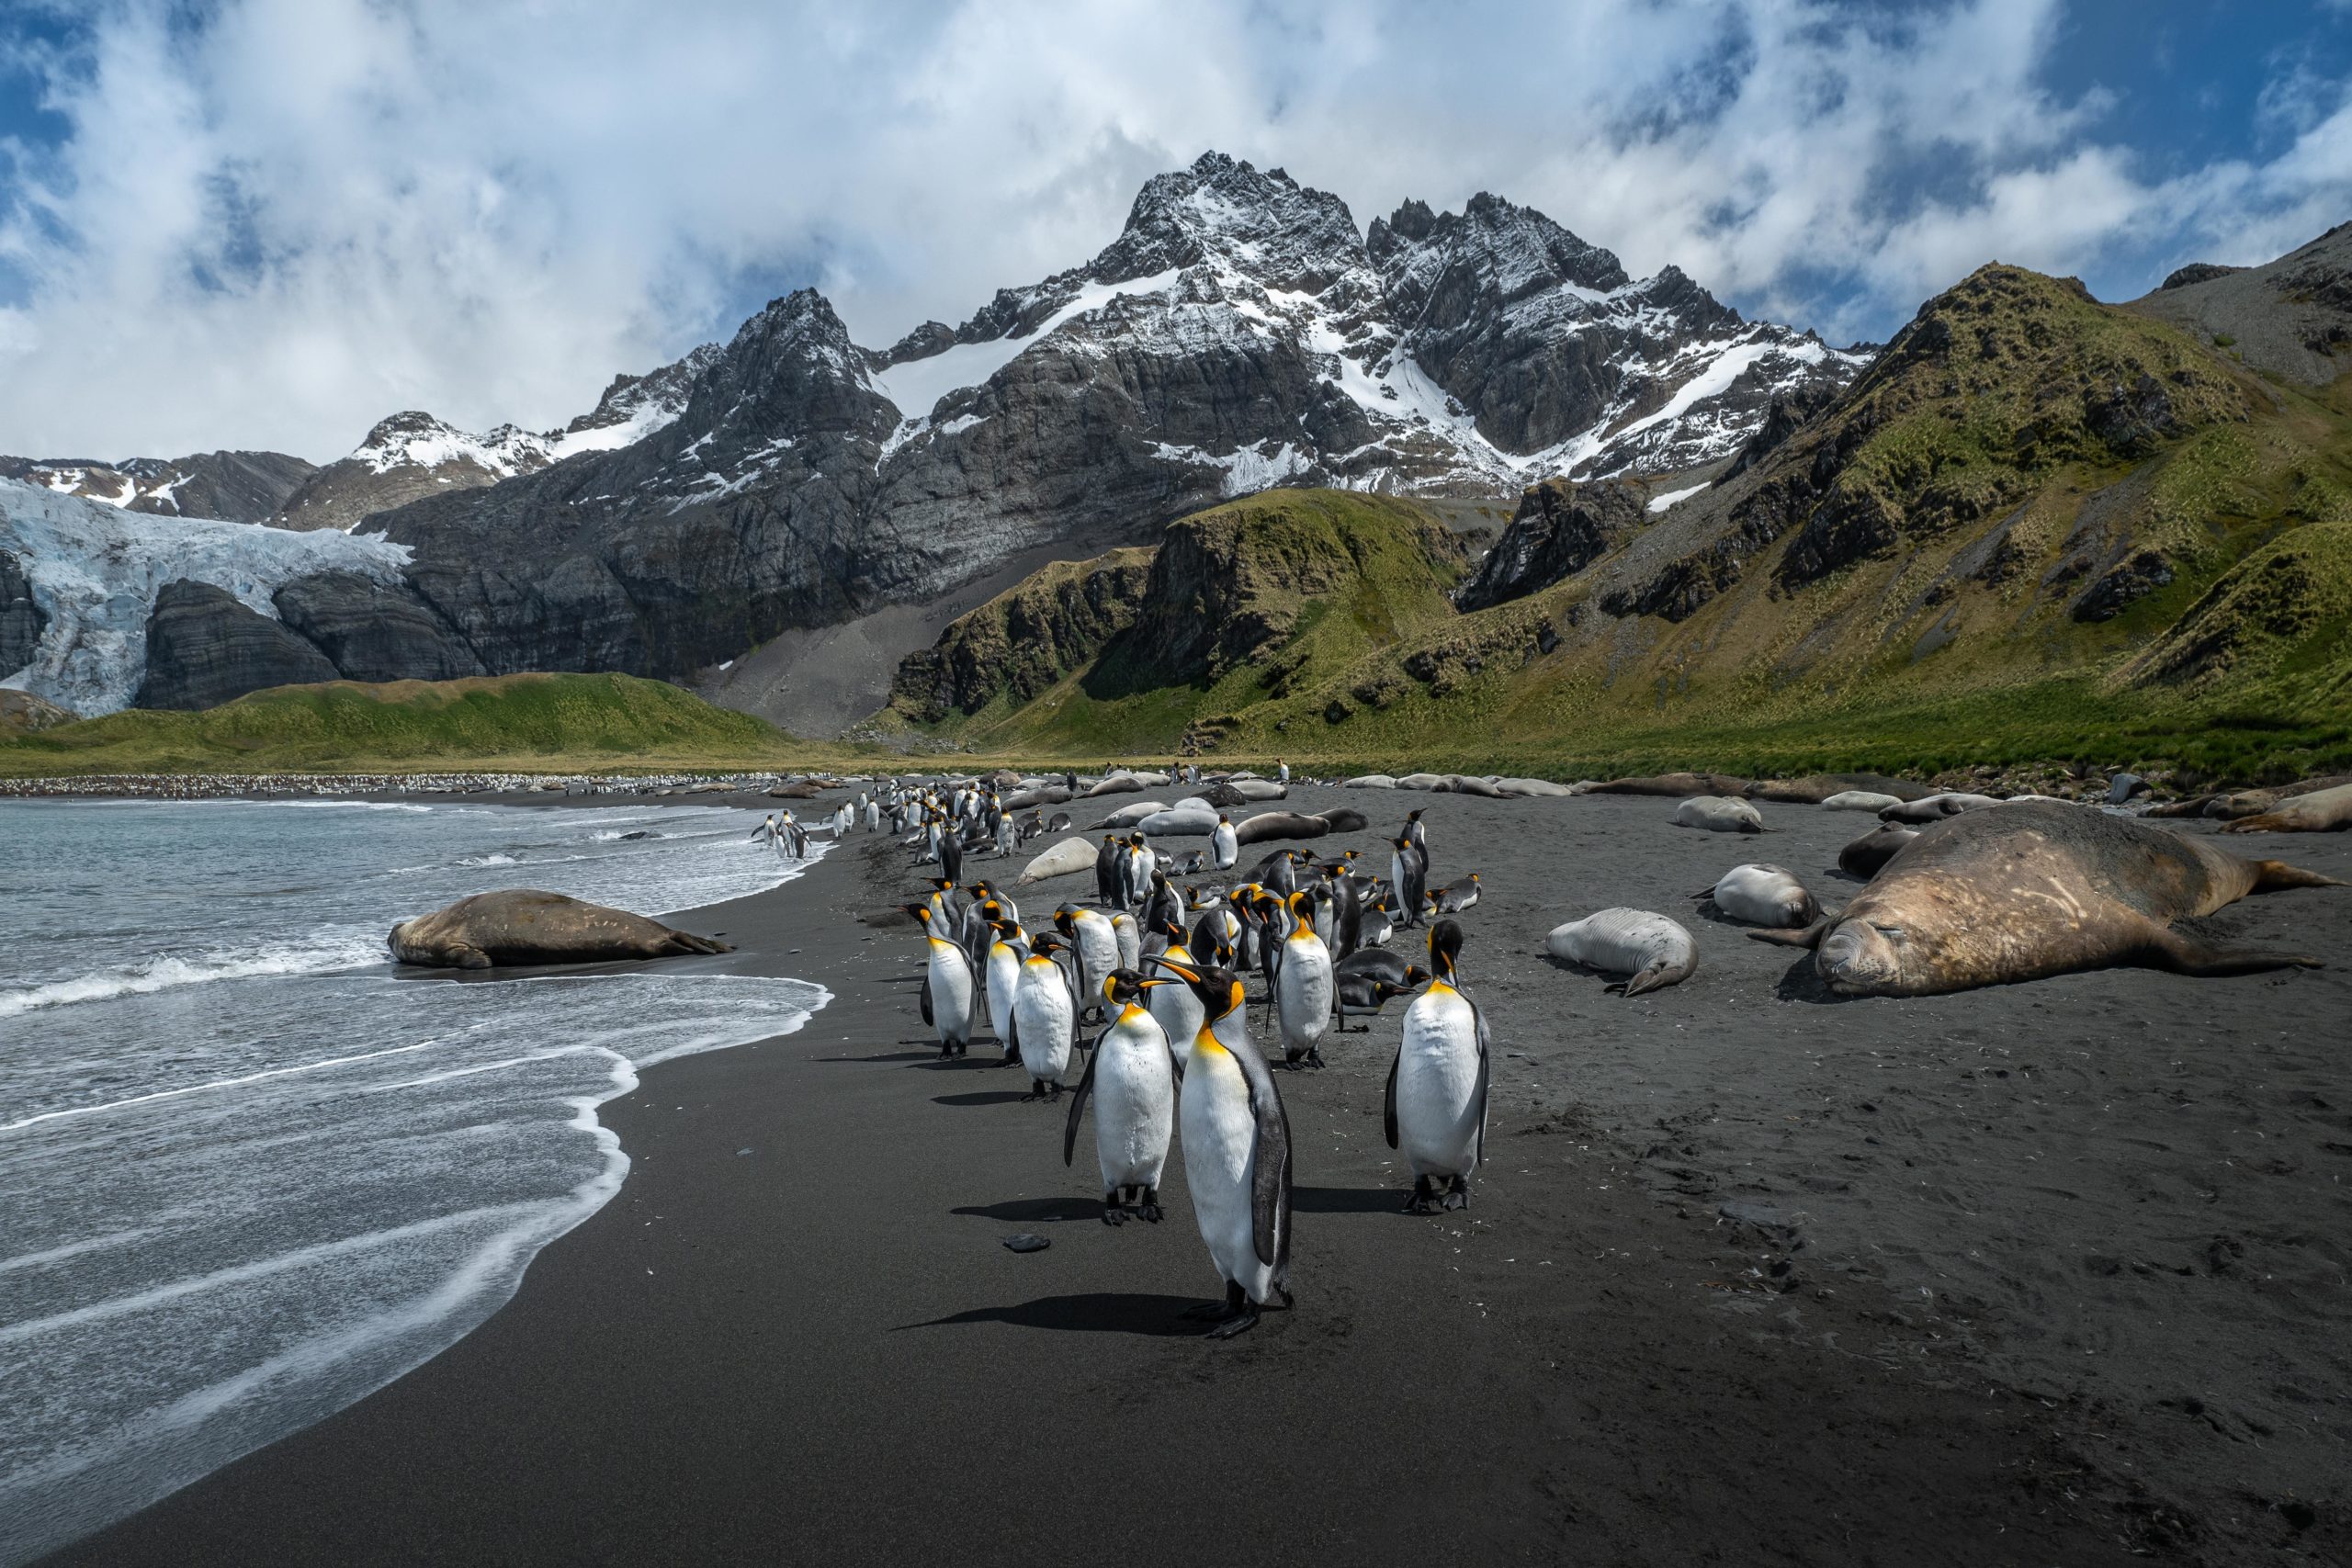 Landscape photography. King penguins and elephant seals share the beach on Gold Harbor, South Georgia Island